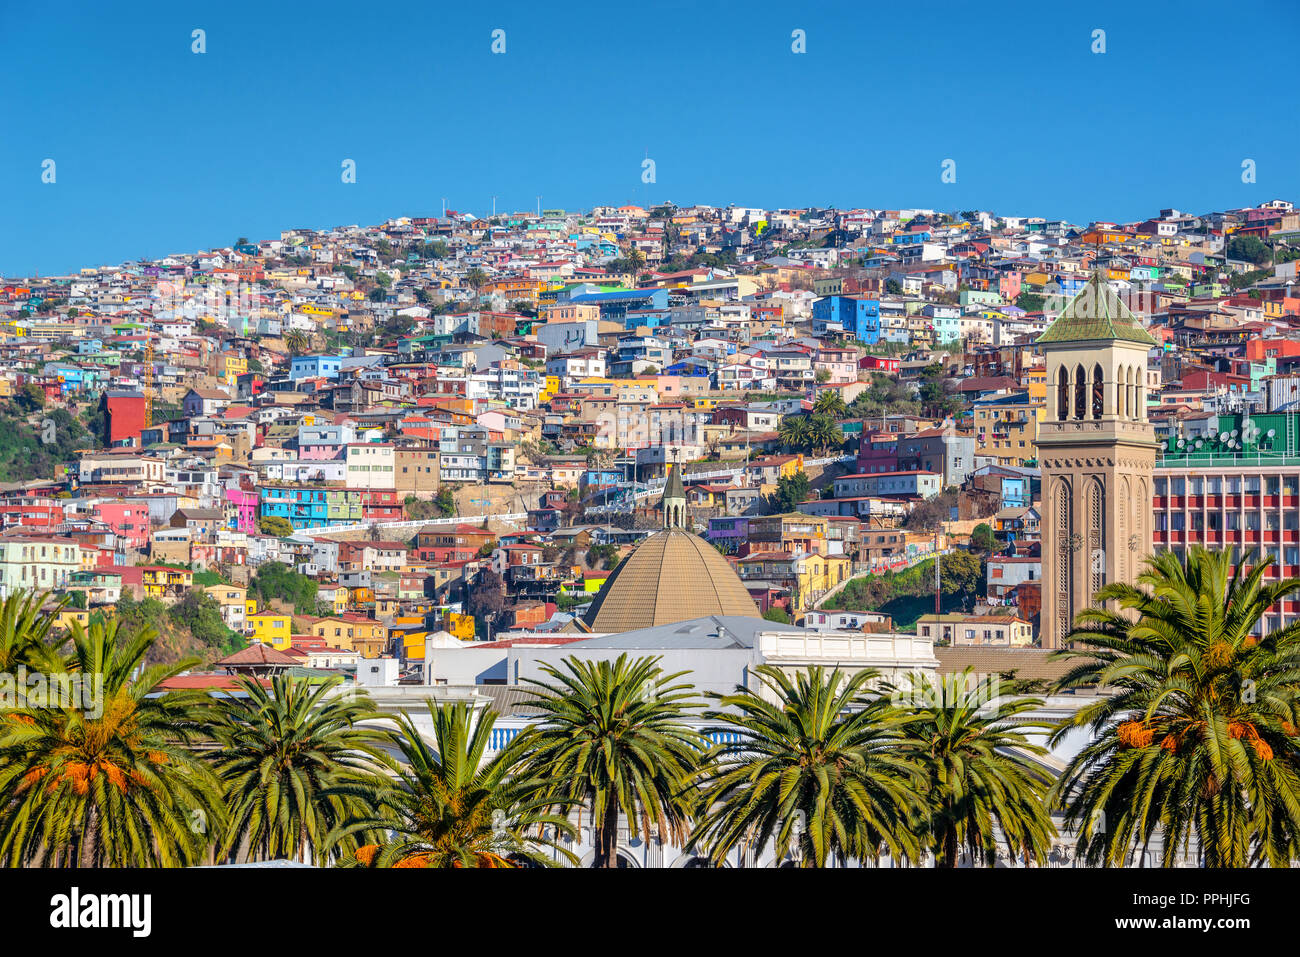 Colorful houses on a hill of Valparaiso, Chile Stock Photo